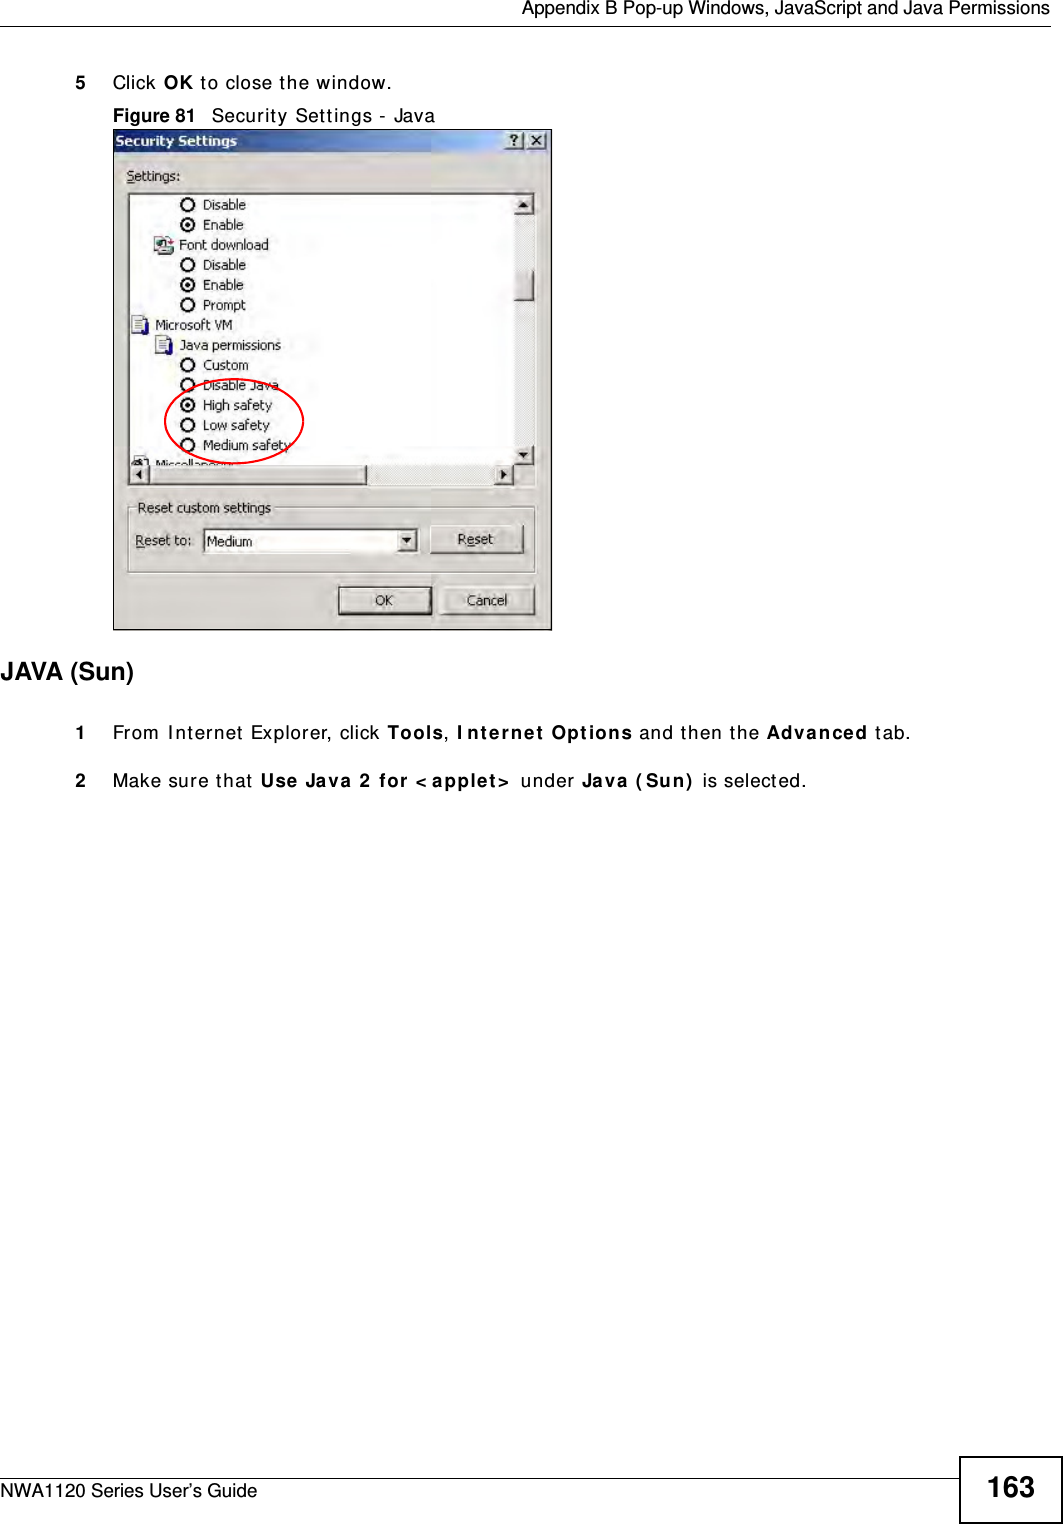  Appendix B Pop-up Windows, JavaScript and Java PermissionsNWA1120 Series User’s Guide 1635Click OK to close the window.Figure 81   Security Settings - Java JAVA (Sun)1From Internet Explorer, click Tools, Internet Options and then the Advanced tab. 2Make sure that Use Java 2 for &lt;applet&gt; under Java (Sun) is selected.